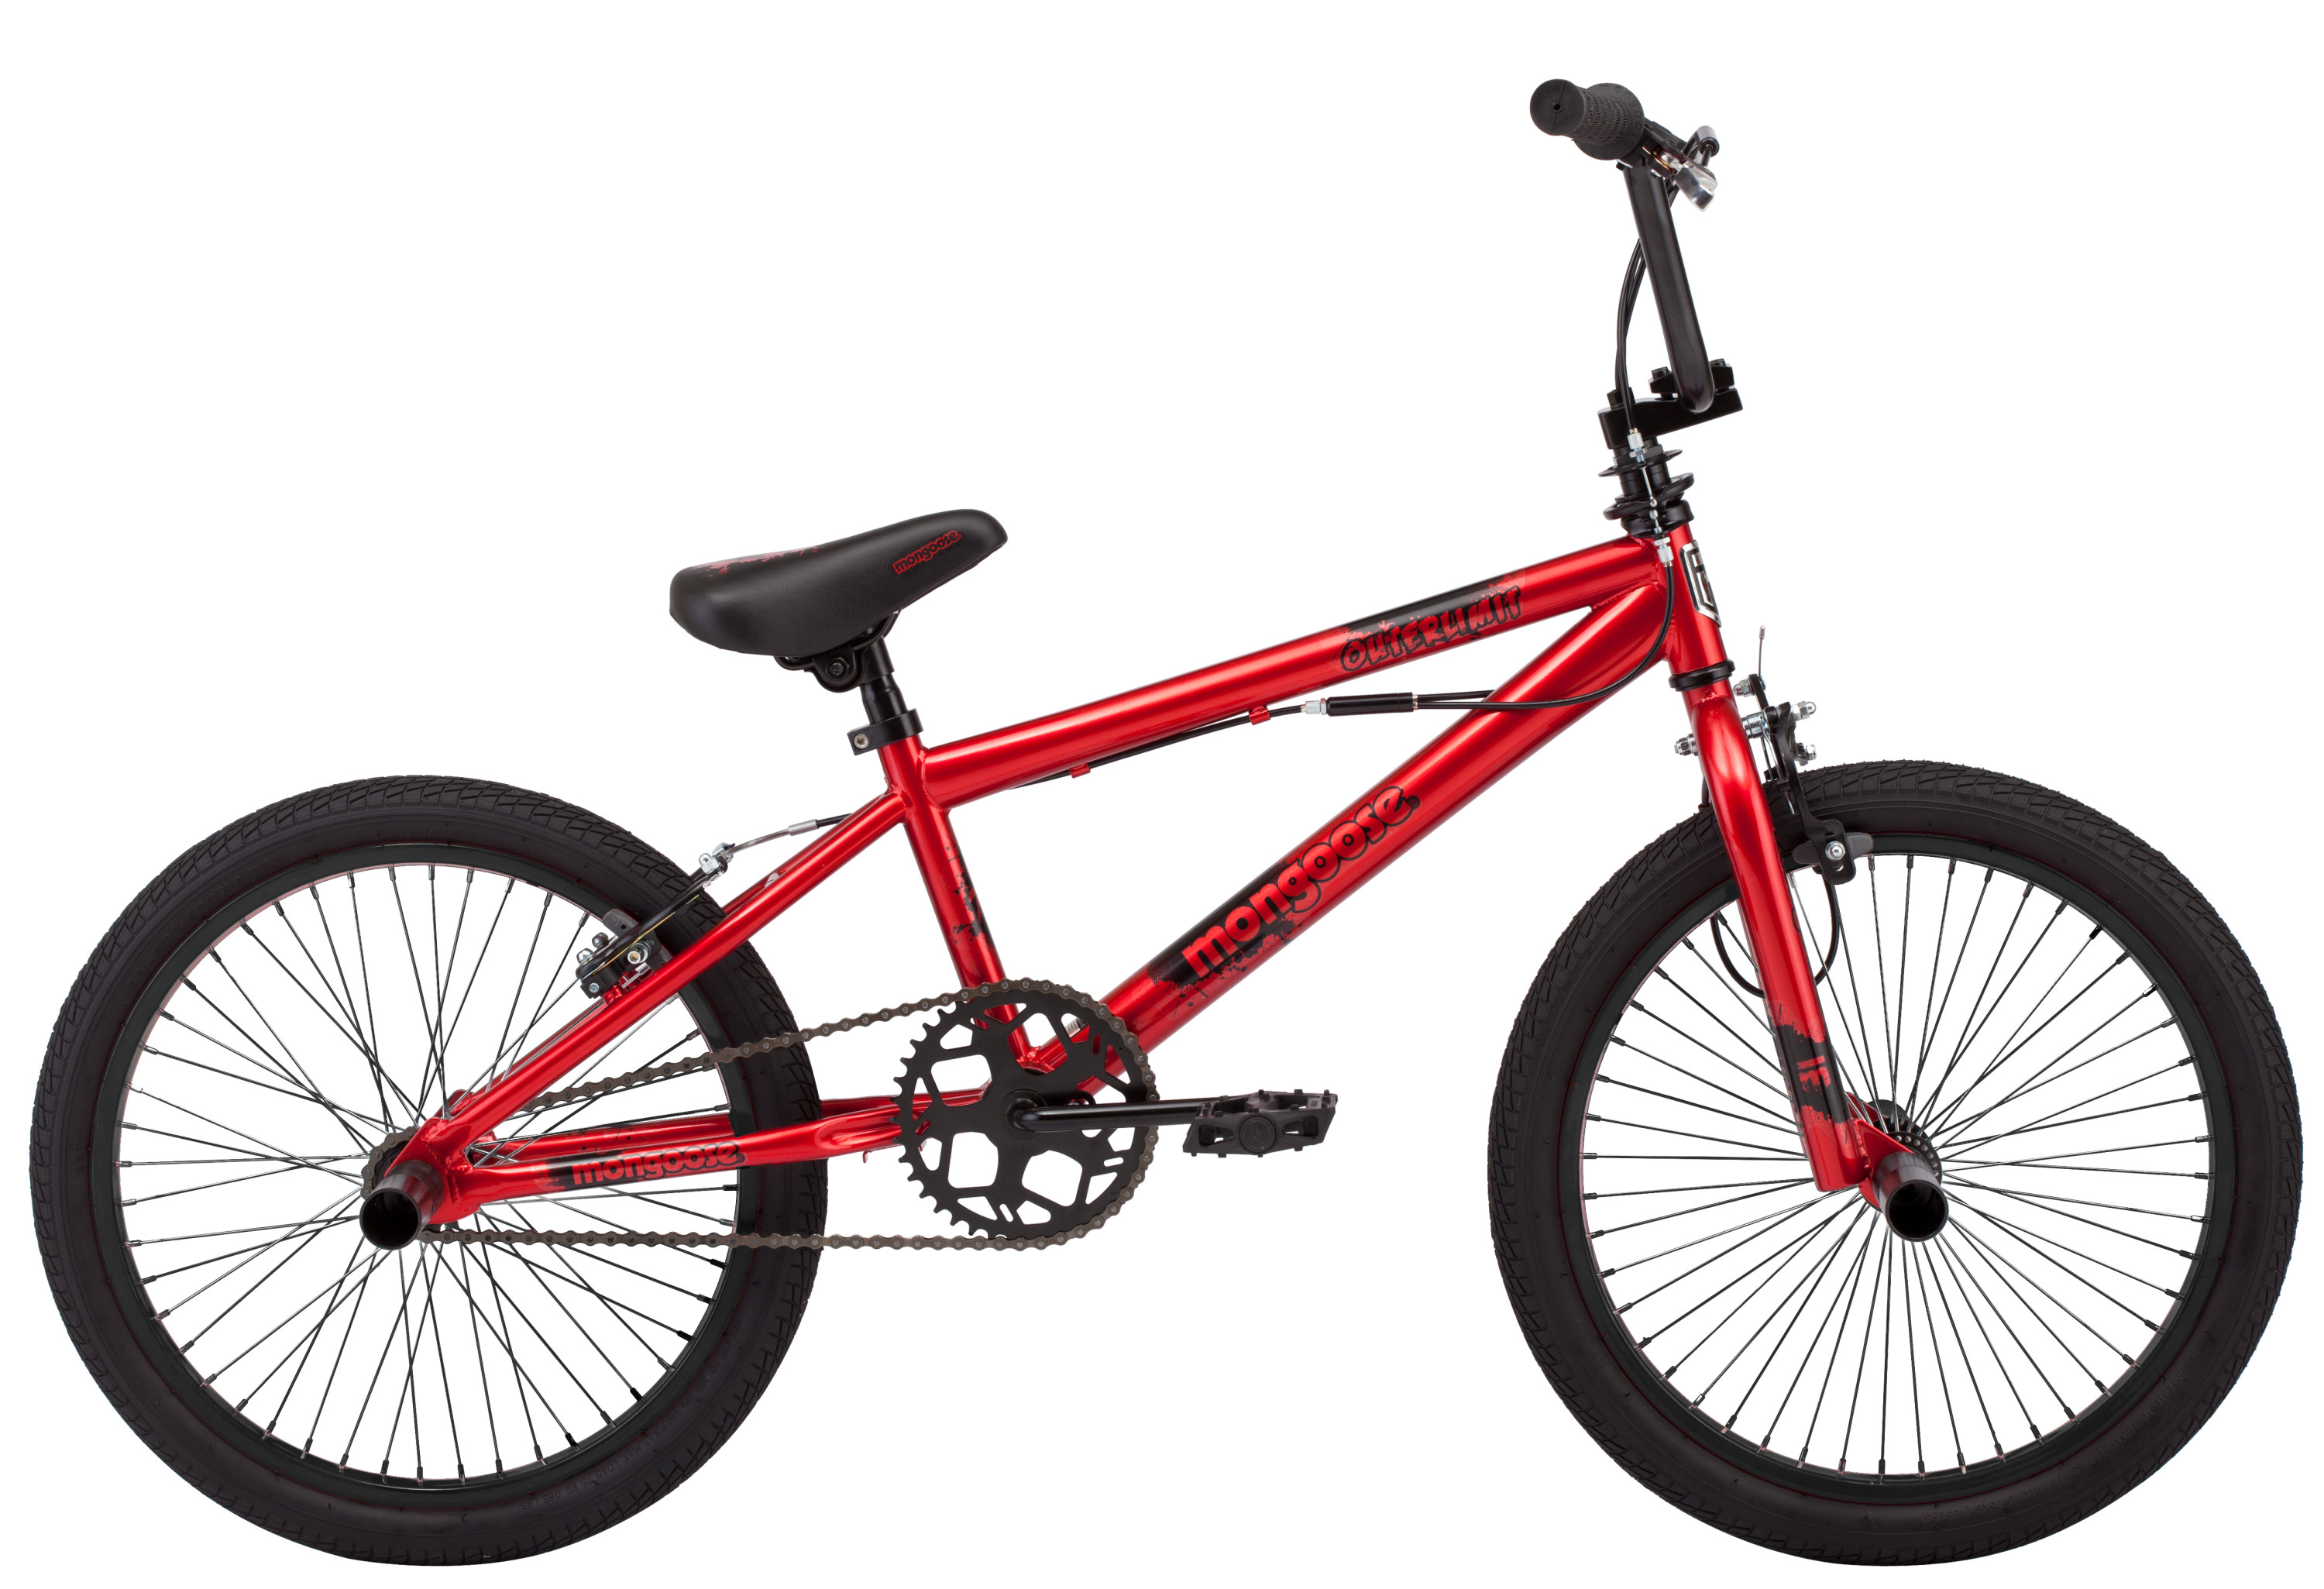 Mongoose 20" Outerlimit BMX Bike, Red - image 3 of 8